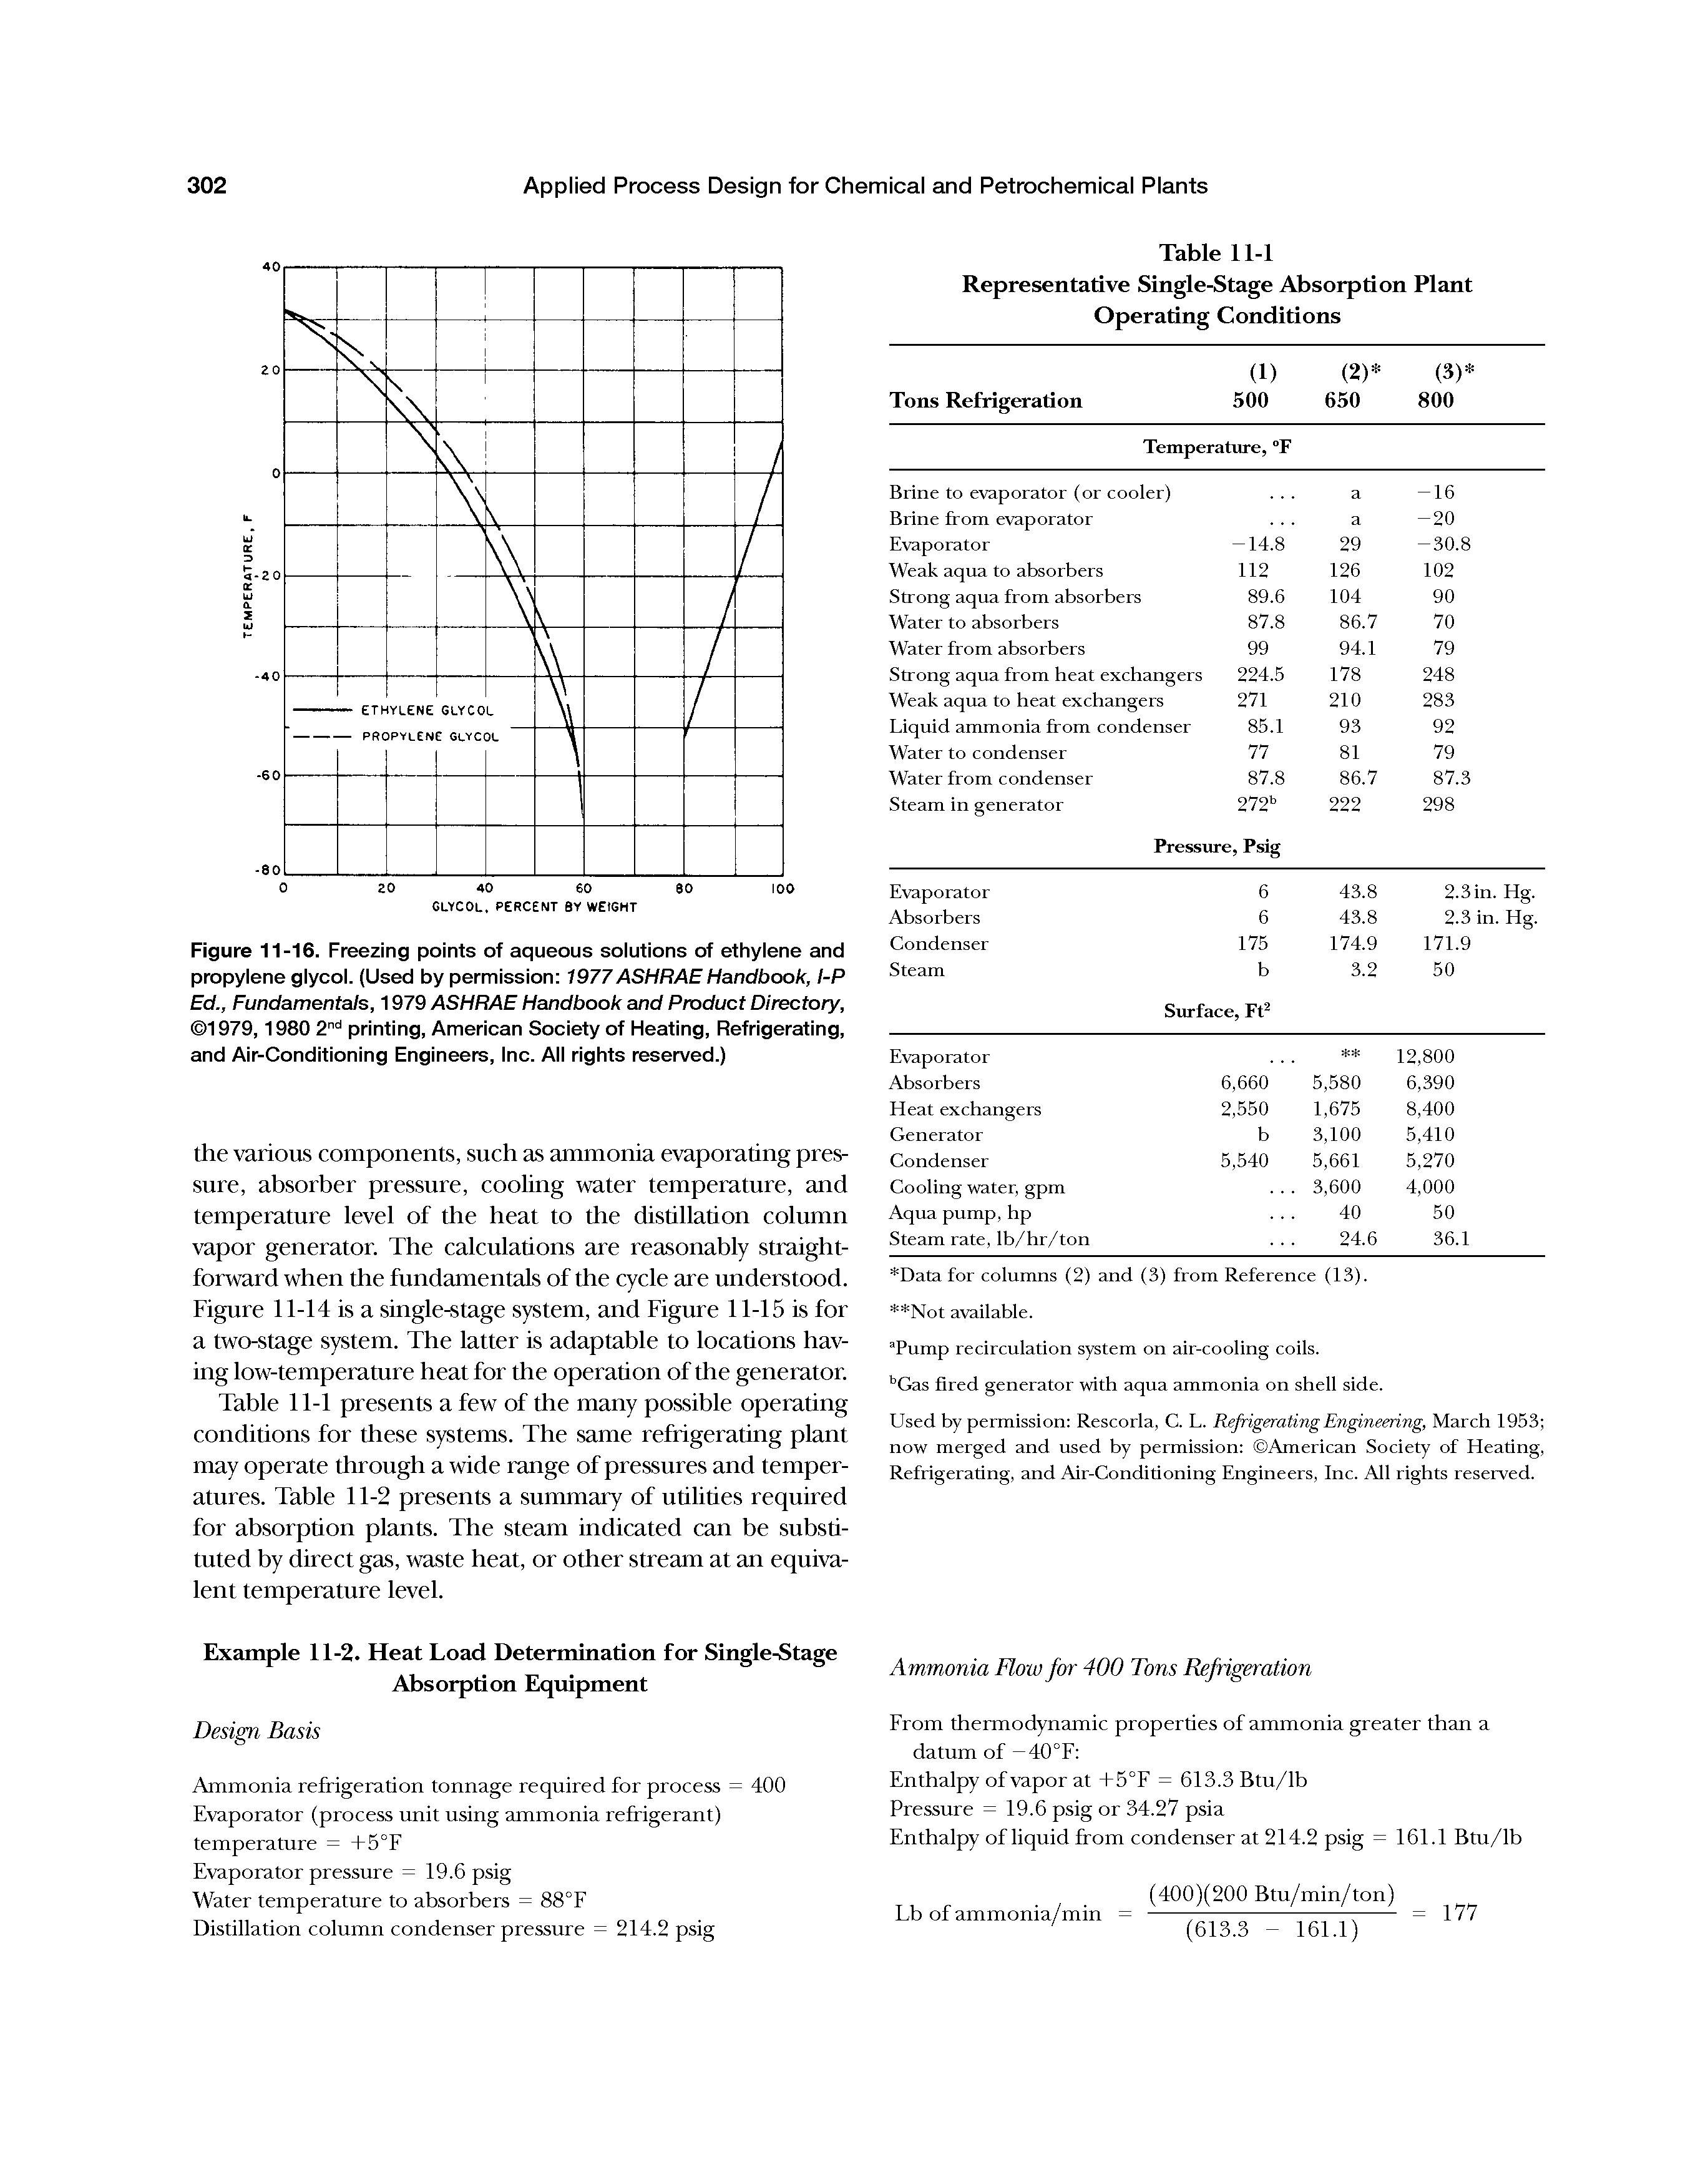 Figure 11-16. Freezing points of aqueous solutions of ethylene and propylene glycol. (Used by permission 1977ASHRAEHandbook, l-P Ed., Fundamentals, 1979 ASHRAE Handbook and Product Directory, 1979,1980 2"= printing, American Society of Heating, Refrigerating, and Air-Conditioning Engineers, Inc. All rights reserved.)...